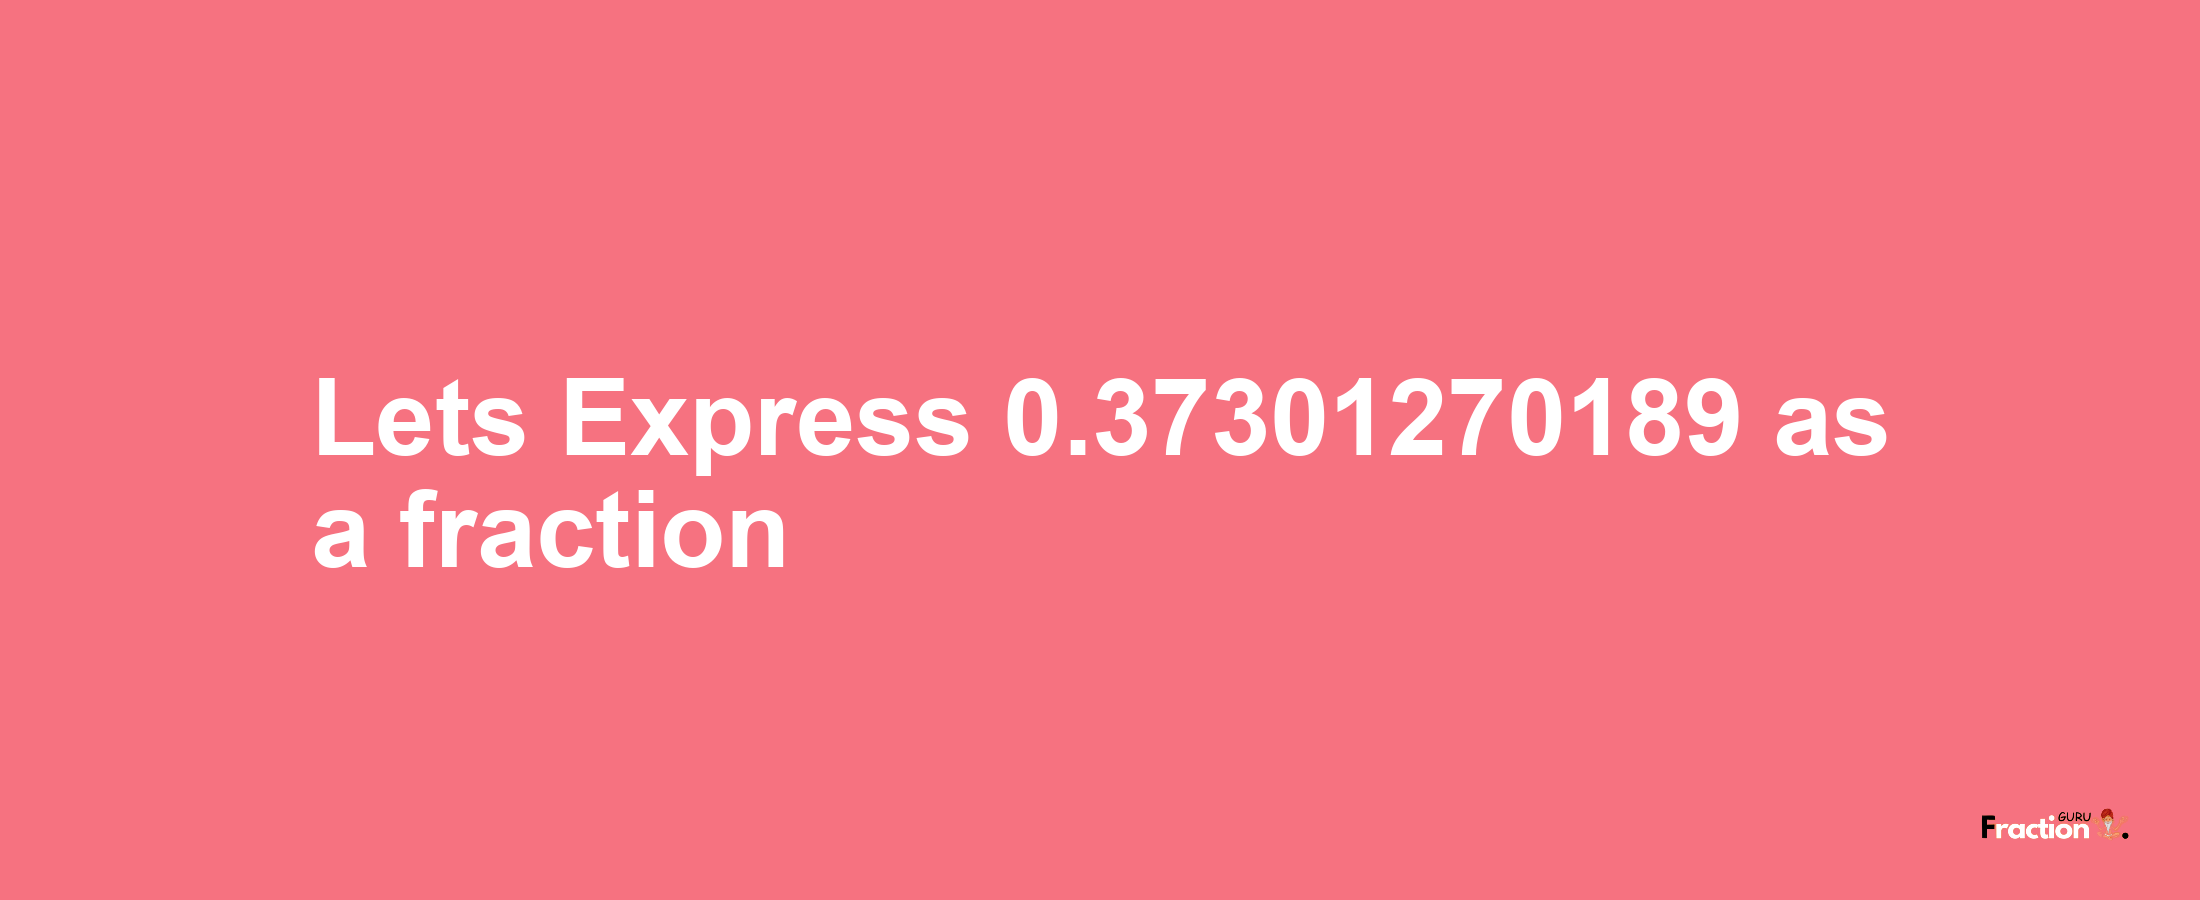 Lets Express 0.37301270189 as afraction